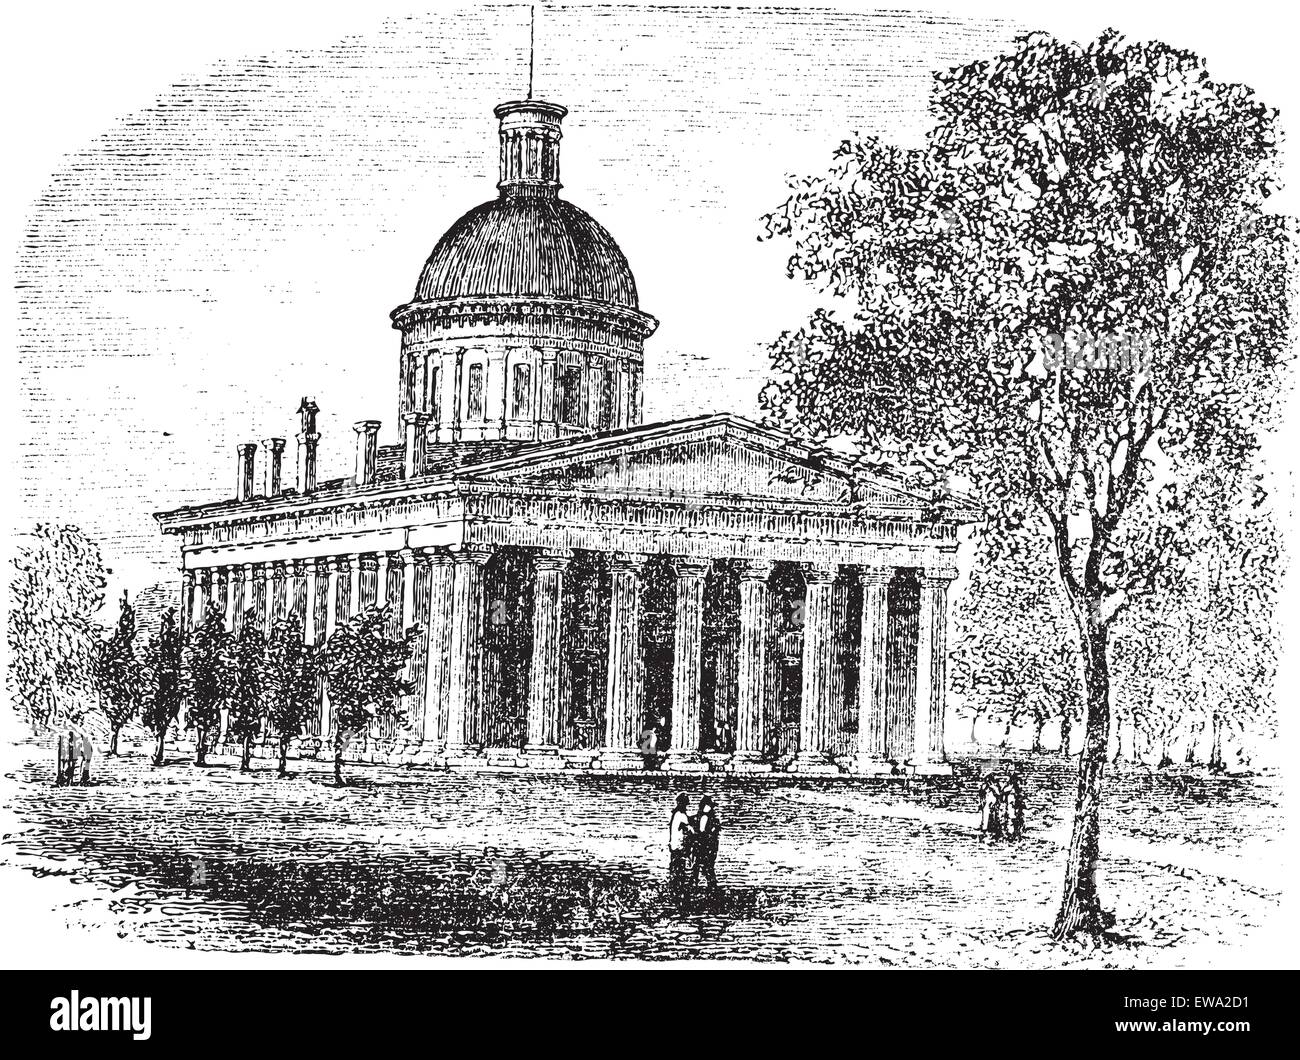 Indiana Statehouse in Indiana, America, during the 1890s, vintage engraving. Old engraved illustration of Indiana Statehouse with trees and people in front. Stock Vector